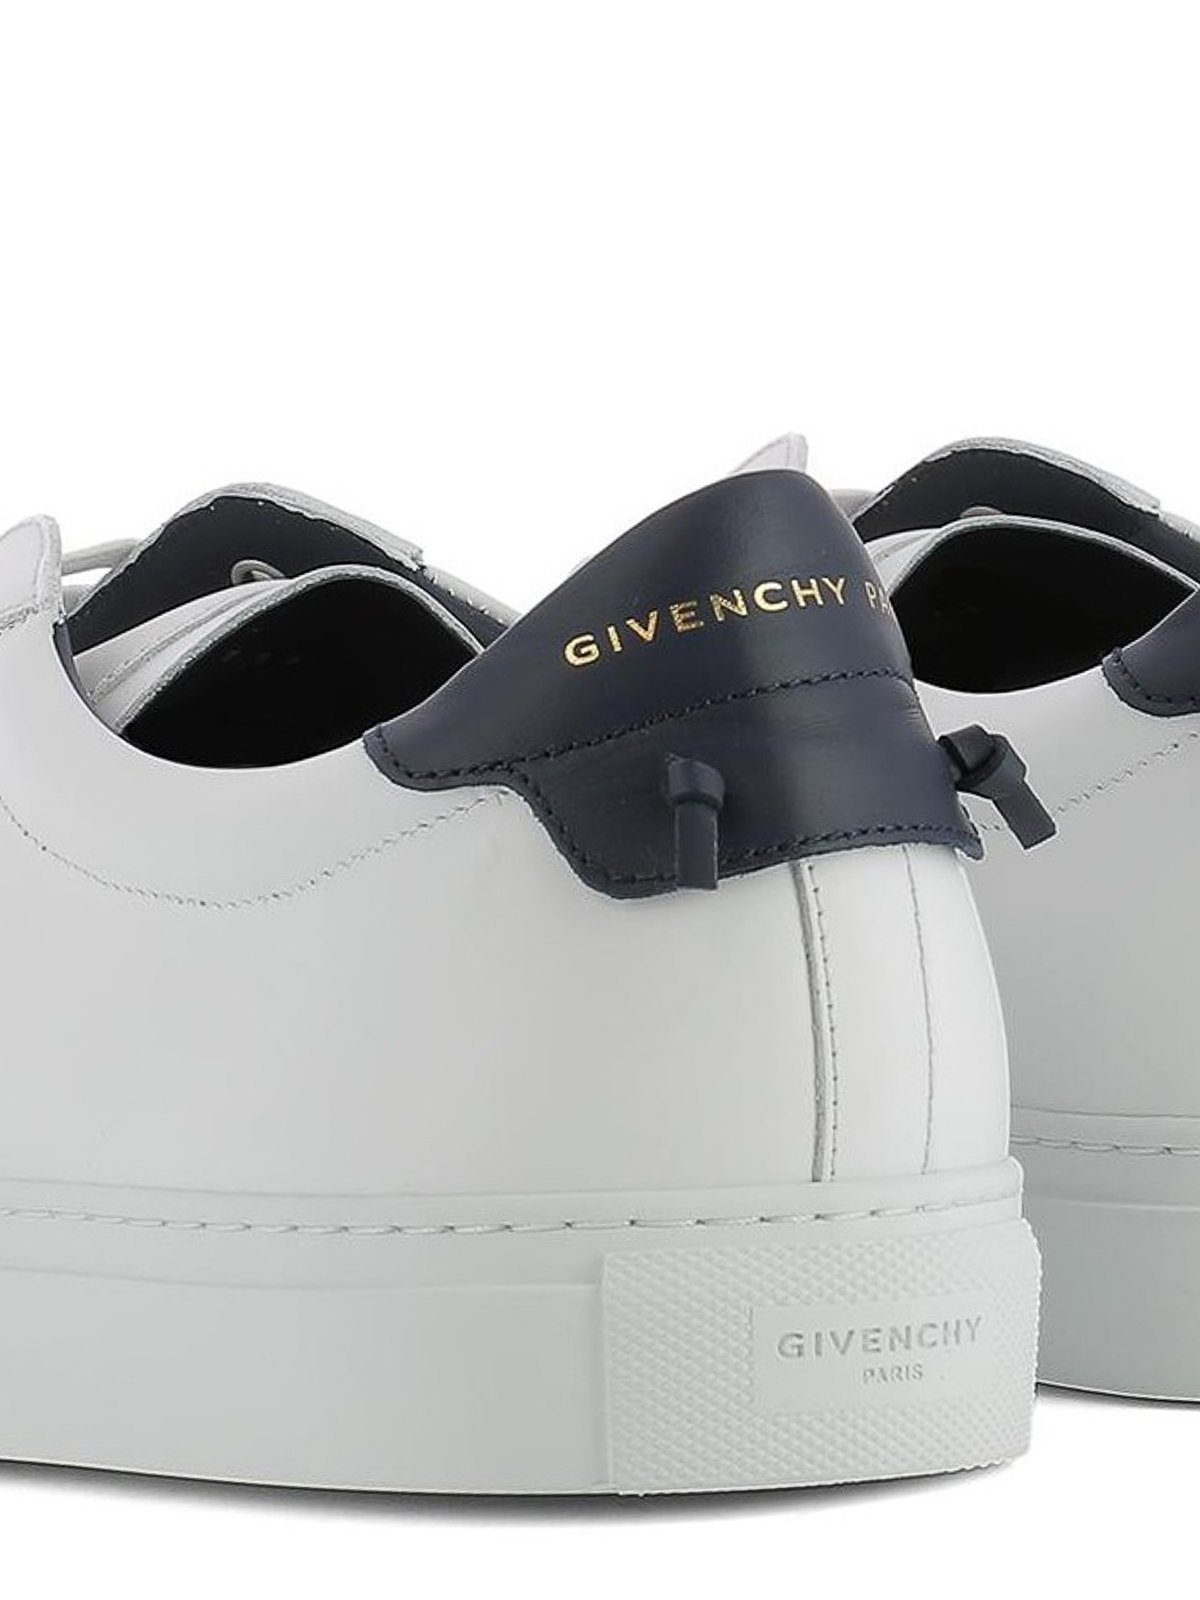 sydvest Indbildsk accent Trainers Givenchy - Knots detail leather sneakers - BM08219876131